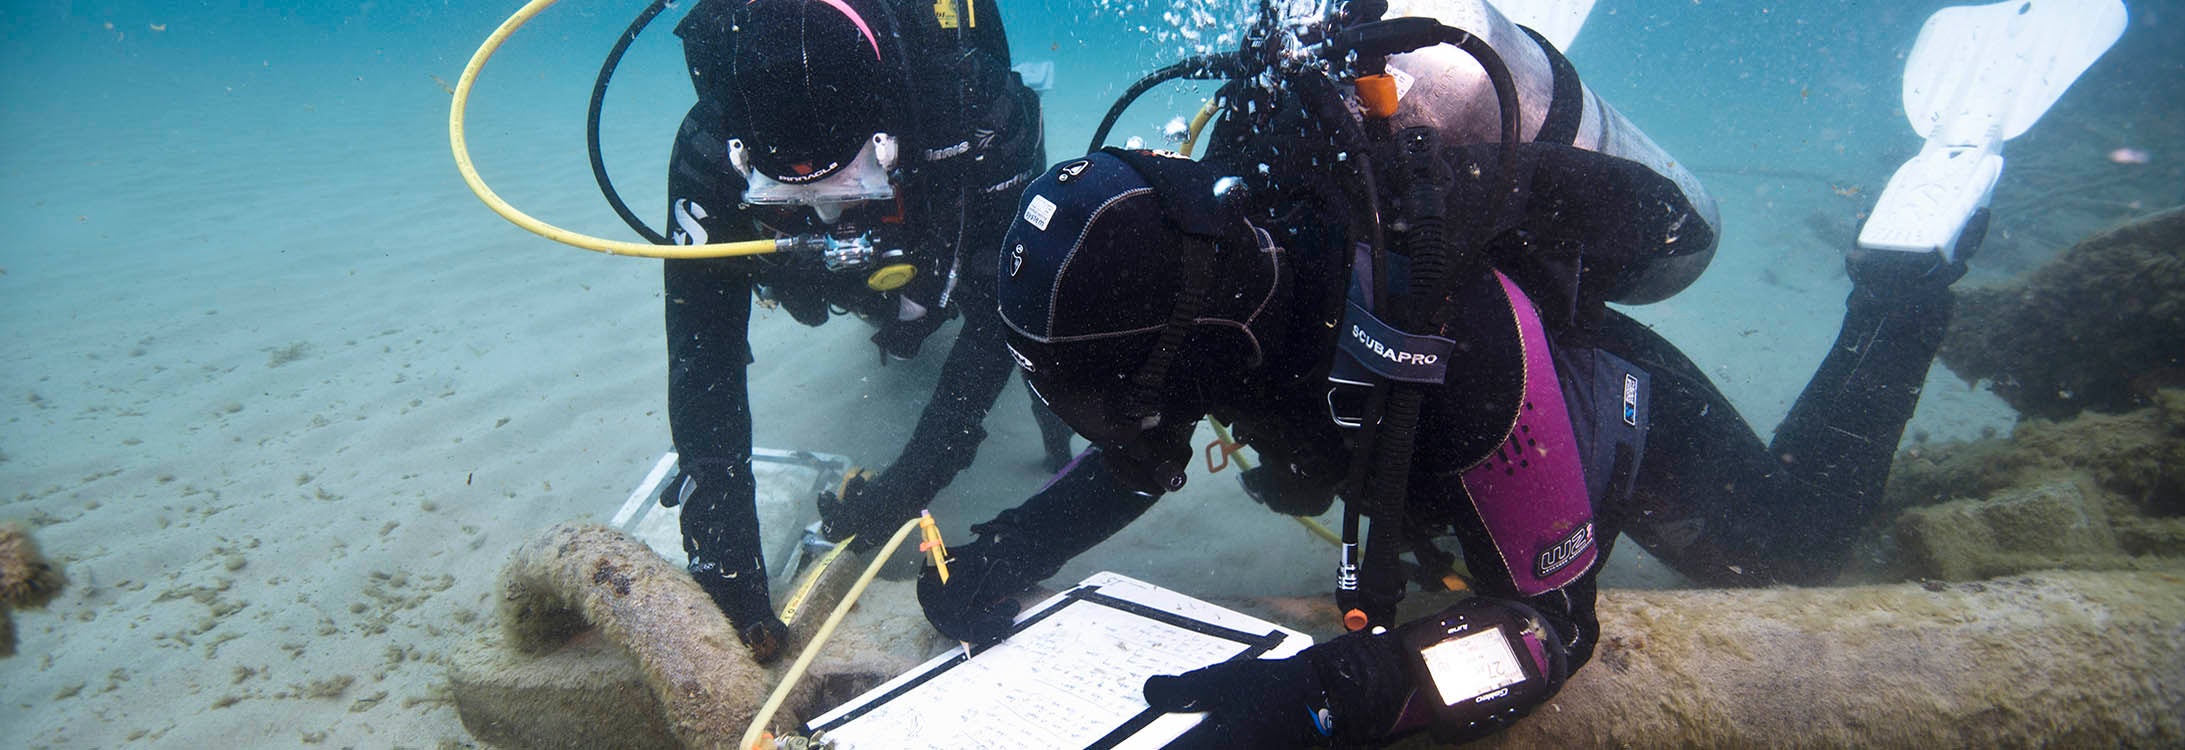 Students from ECU’s Program in Maritime Studies document the wreckage of the Ogarita in the Thunder Bay National Marine Sanctuary in Lake Huron near Alpena, Michigan during a field school. The program is one of just three in the nation and draws students and faculty from throughout the world. (Photo by Tane Casserley)